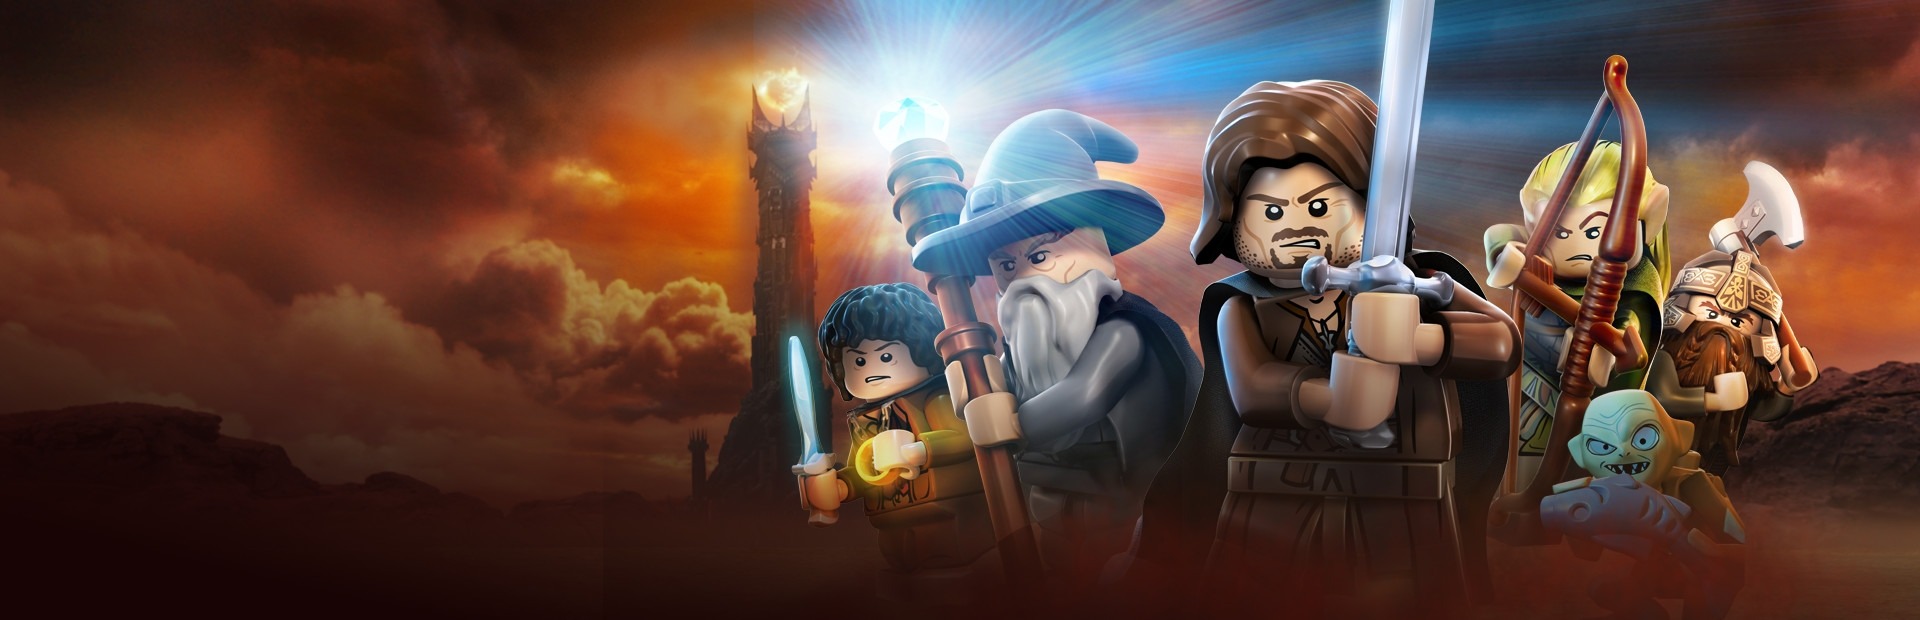 Lego lord of the rings стим фото 15